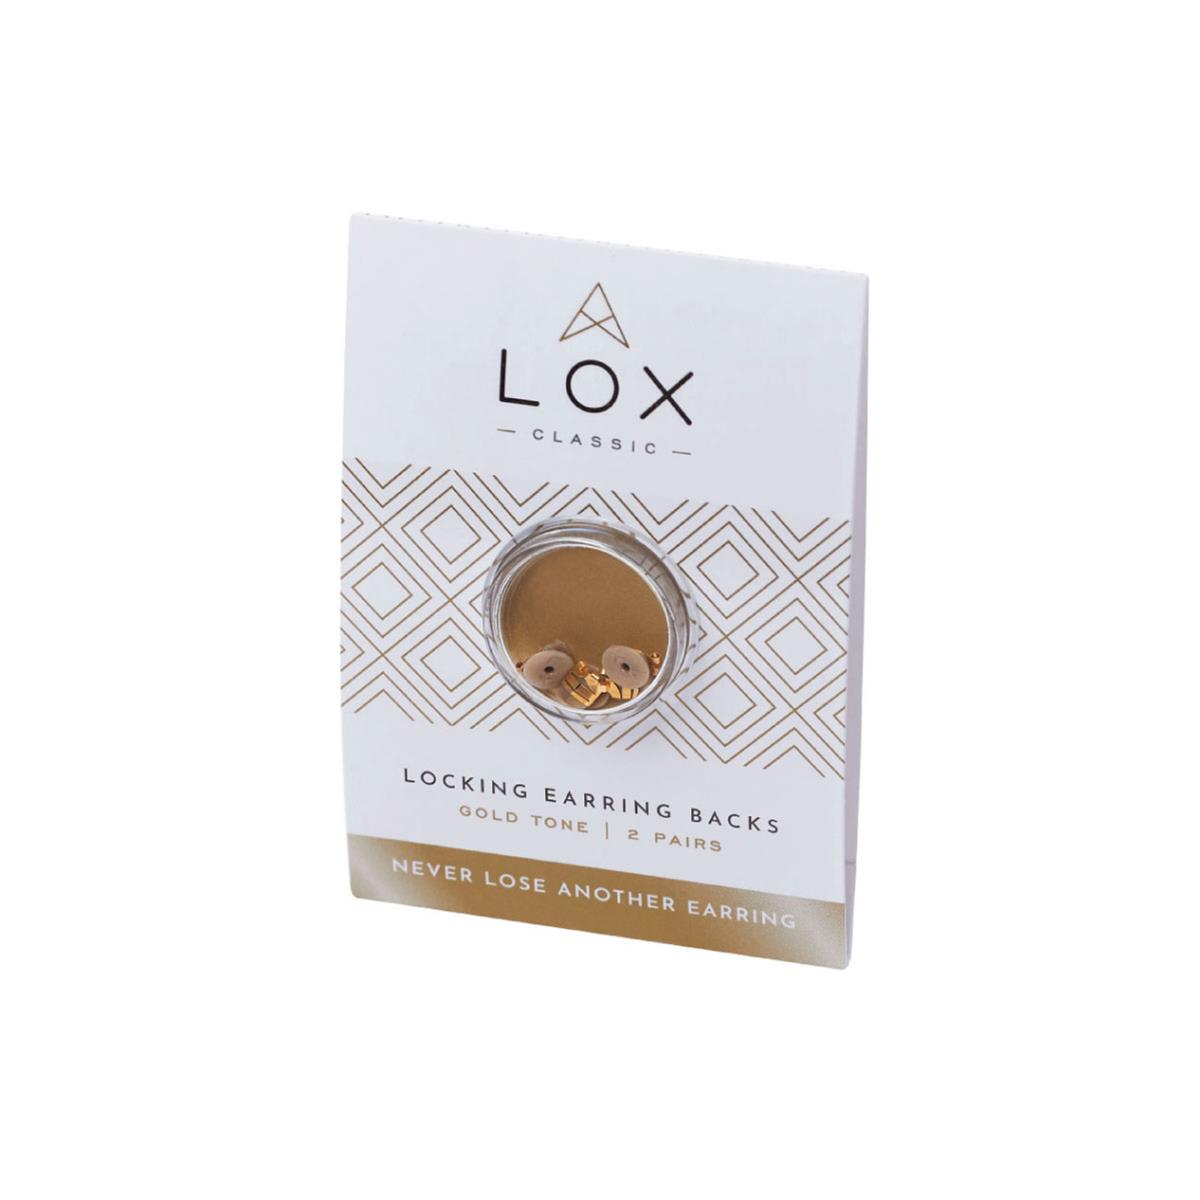 LOX Rose Gold Earrings Backs - Secure, Locking and Lifting